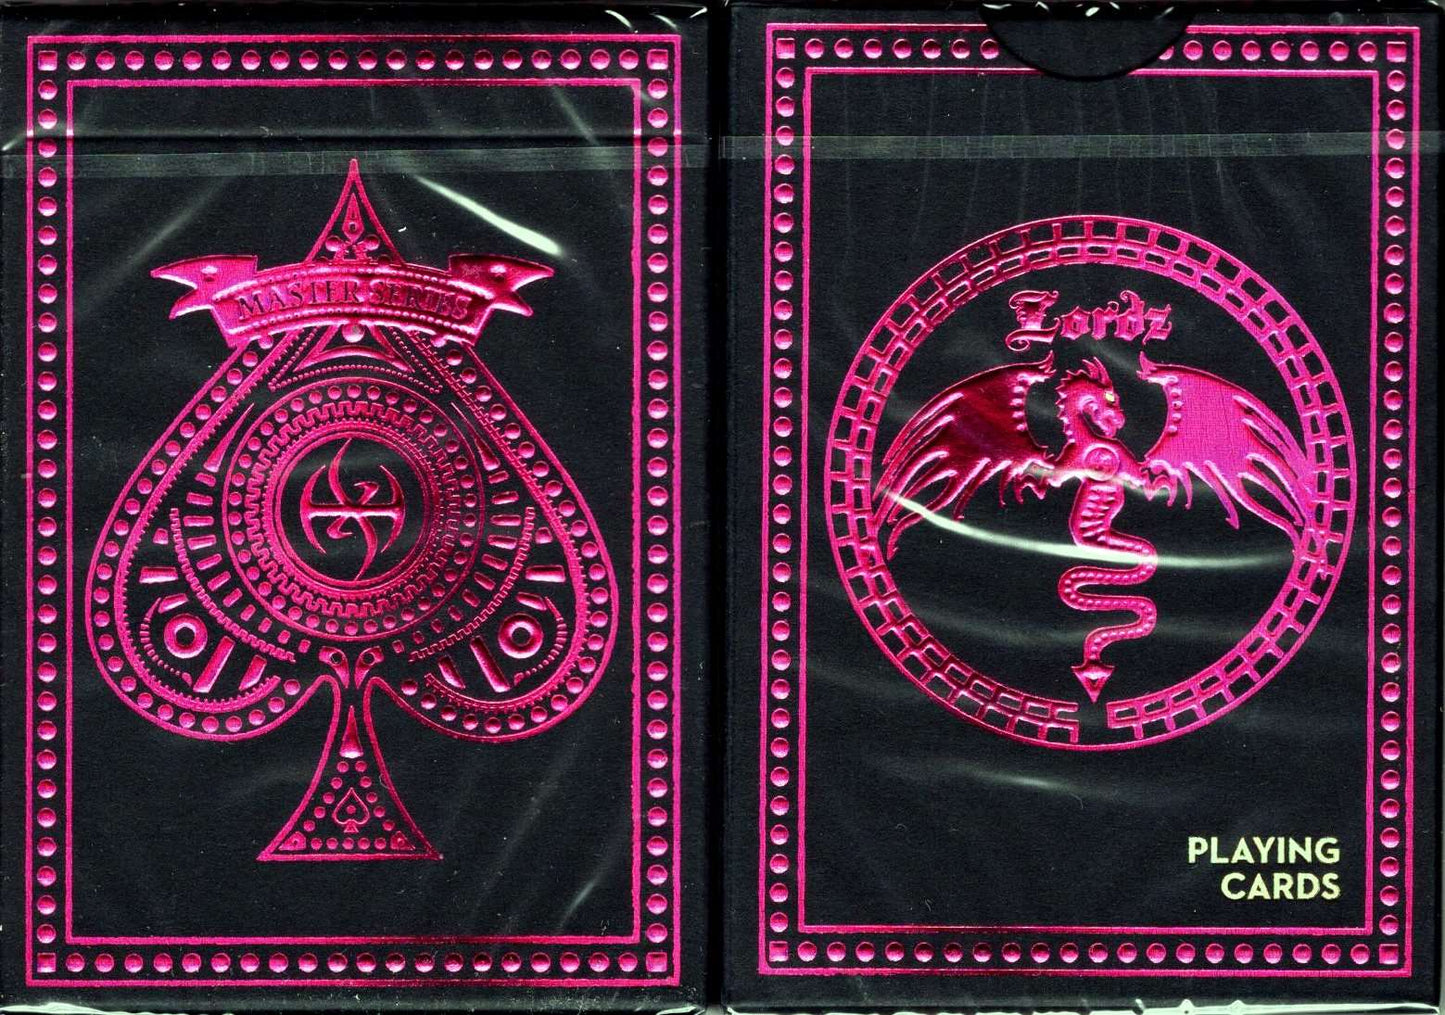 PlayingCardDecks.com-Pink Ruby Lordz Deluxe Playing Cards USPCC